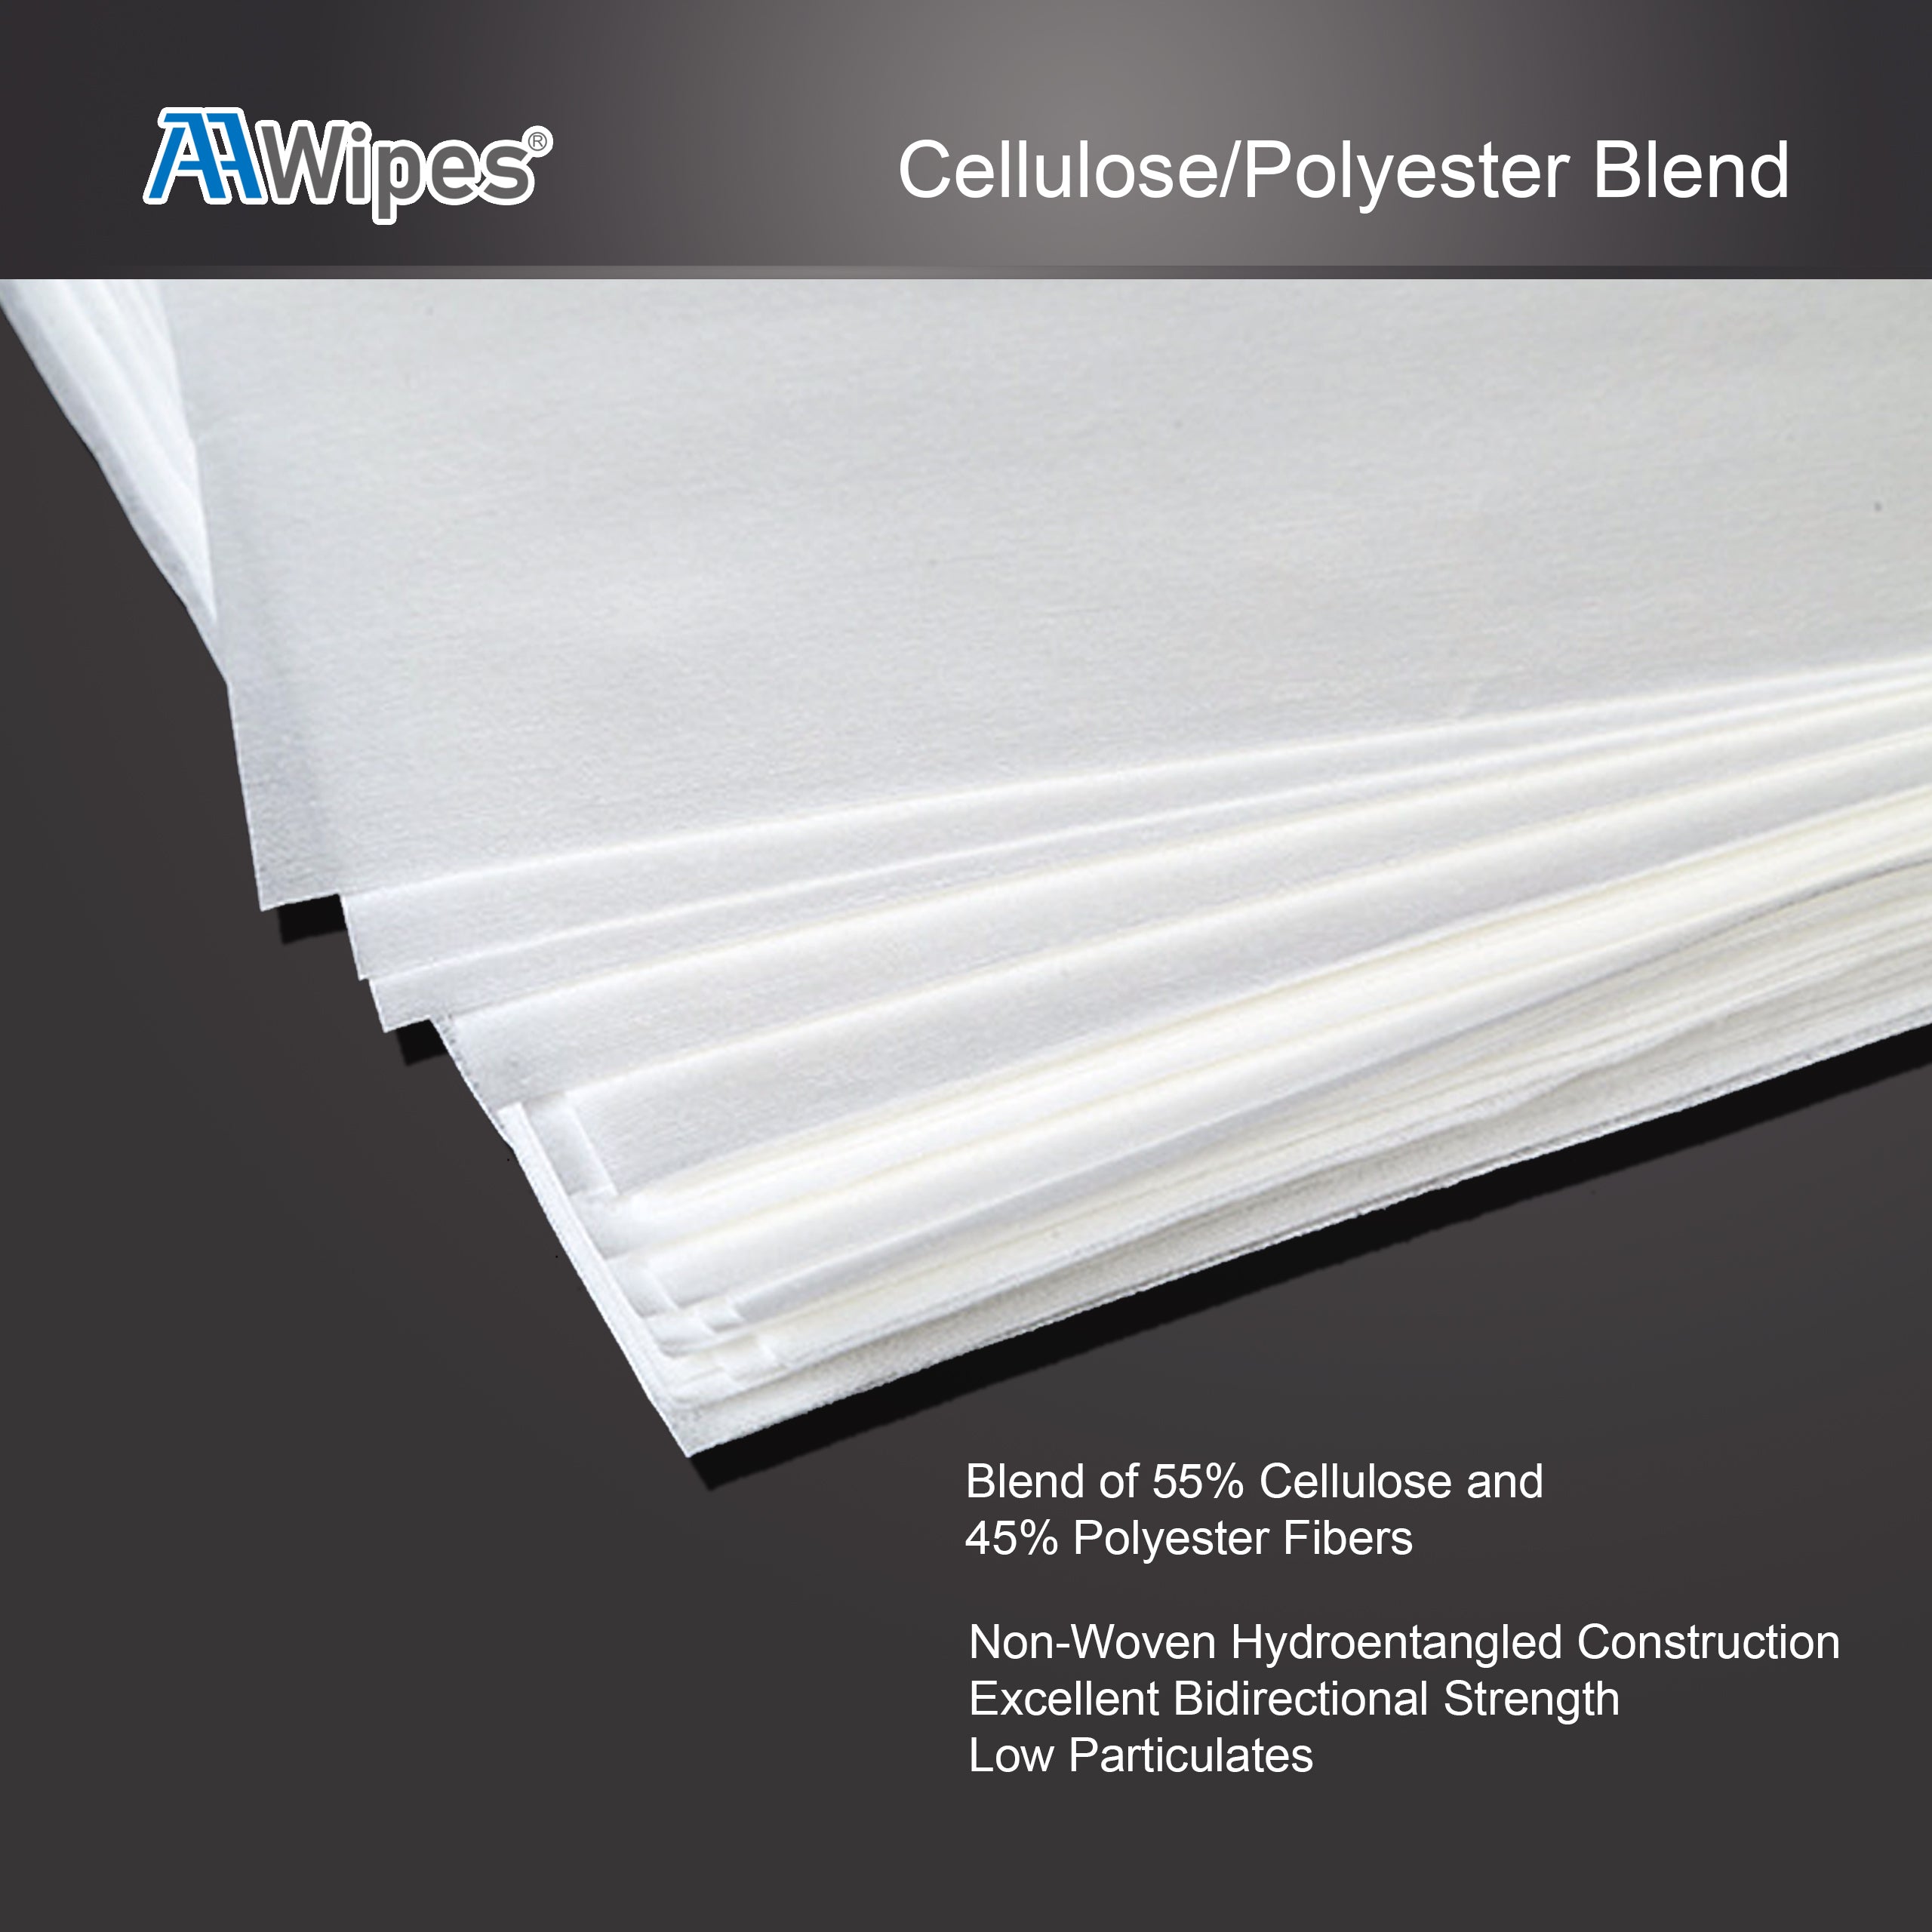 Cleanroom Nonwoven Wipes, Cellulose/Polyester Blend, 6" x 6" (Starting at 1 Box 9,000 Wipes per 30 Bags) (No. NW06806)